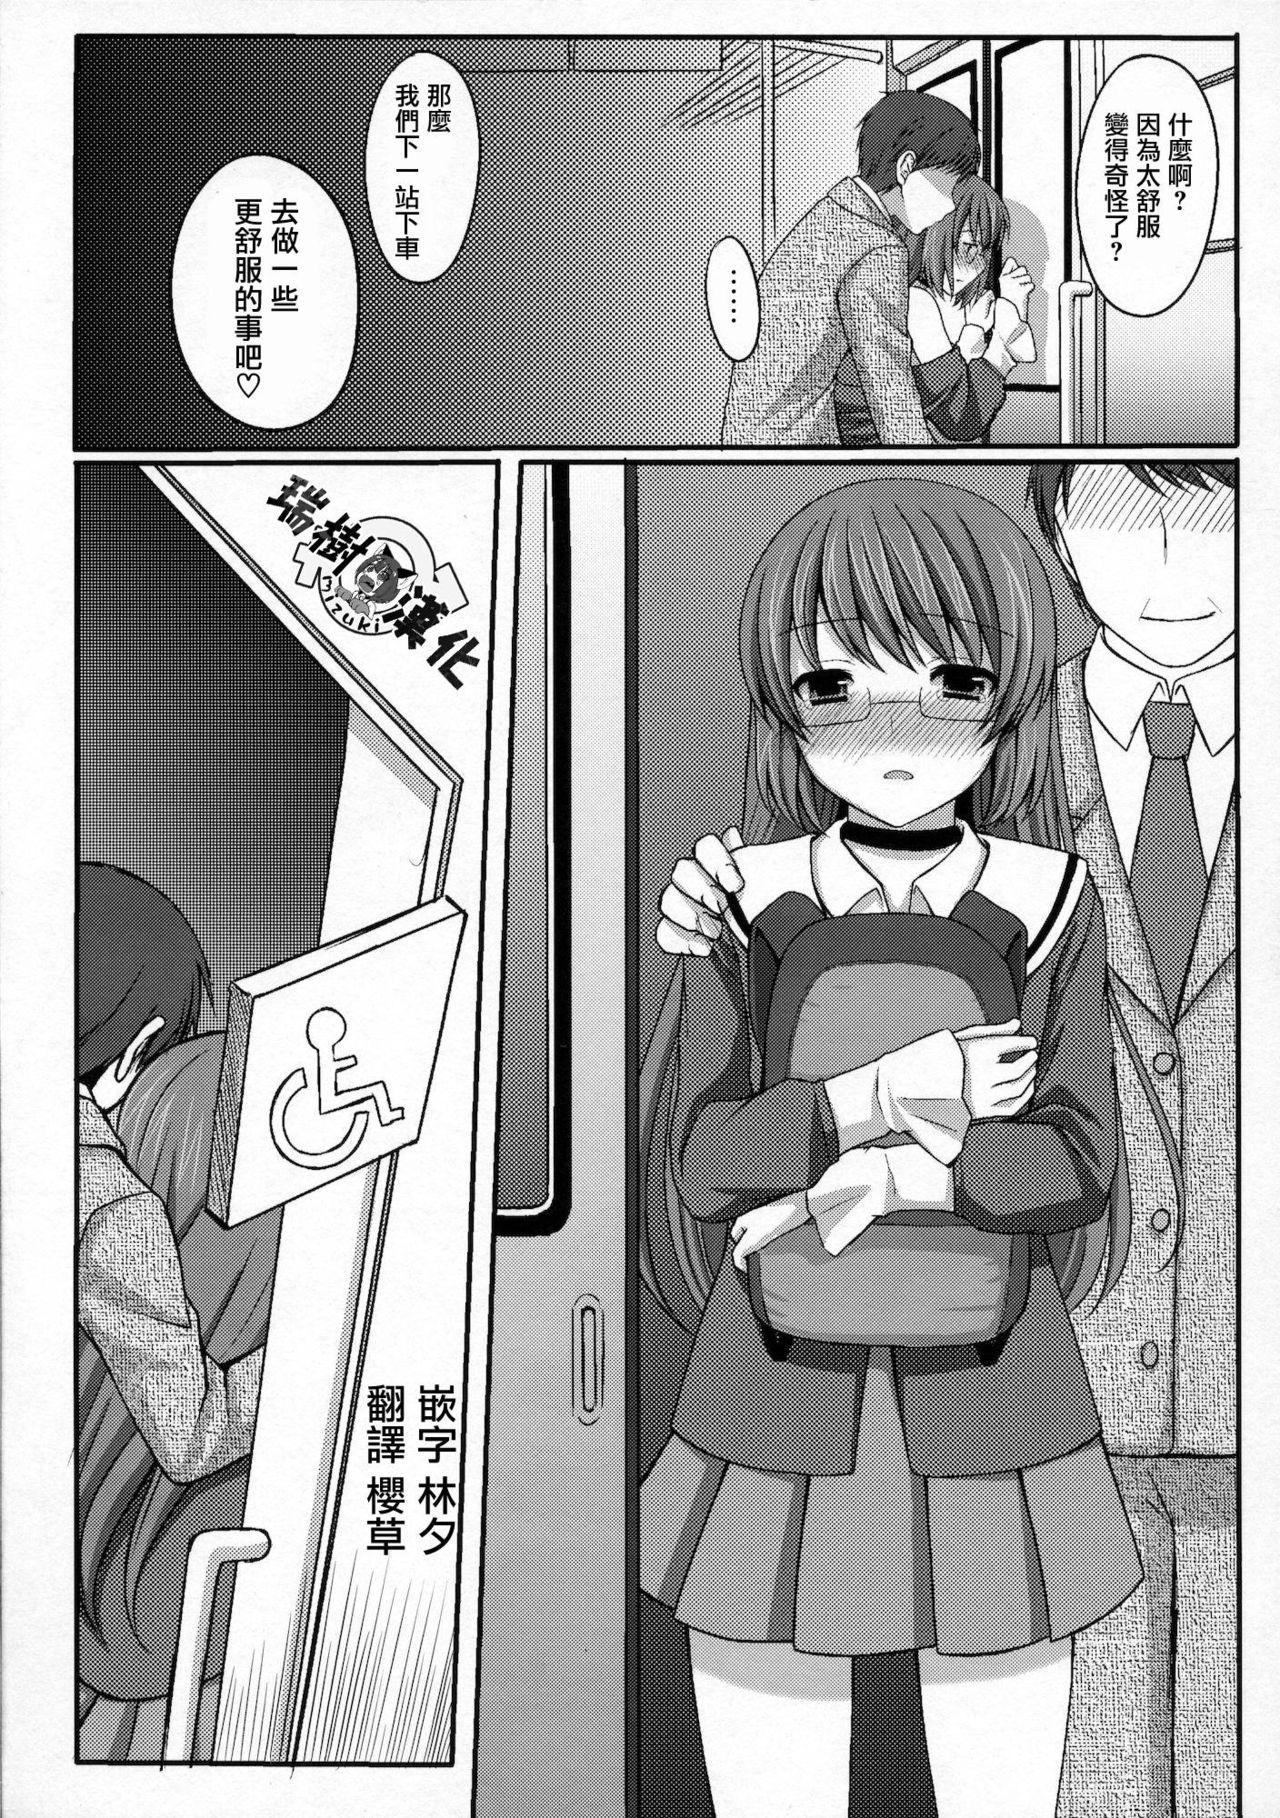 Mms Kami-sama o Chikan - The world god only knows Cam Girl - Page 12